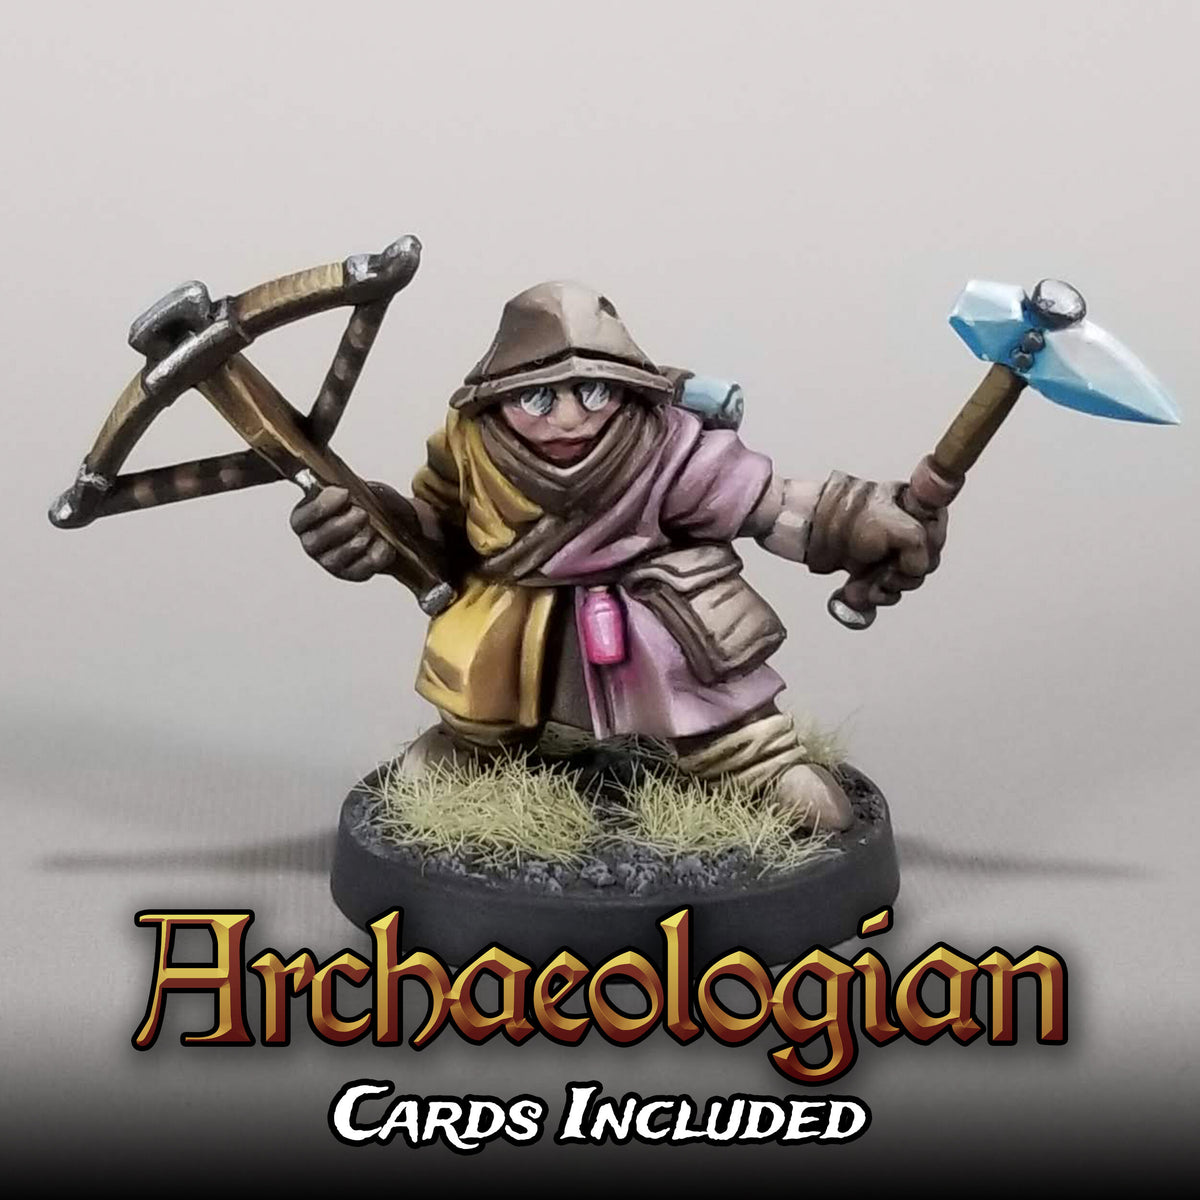 Moldorf Archaeologian with Neutral Character Card and Upgrade Card. Miniature Metal King Studio Exit 23 Games Moldorf Archaeologian with Neutral Character Card and Upgrade Card.